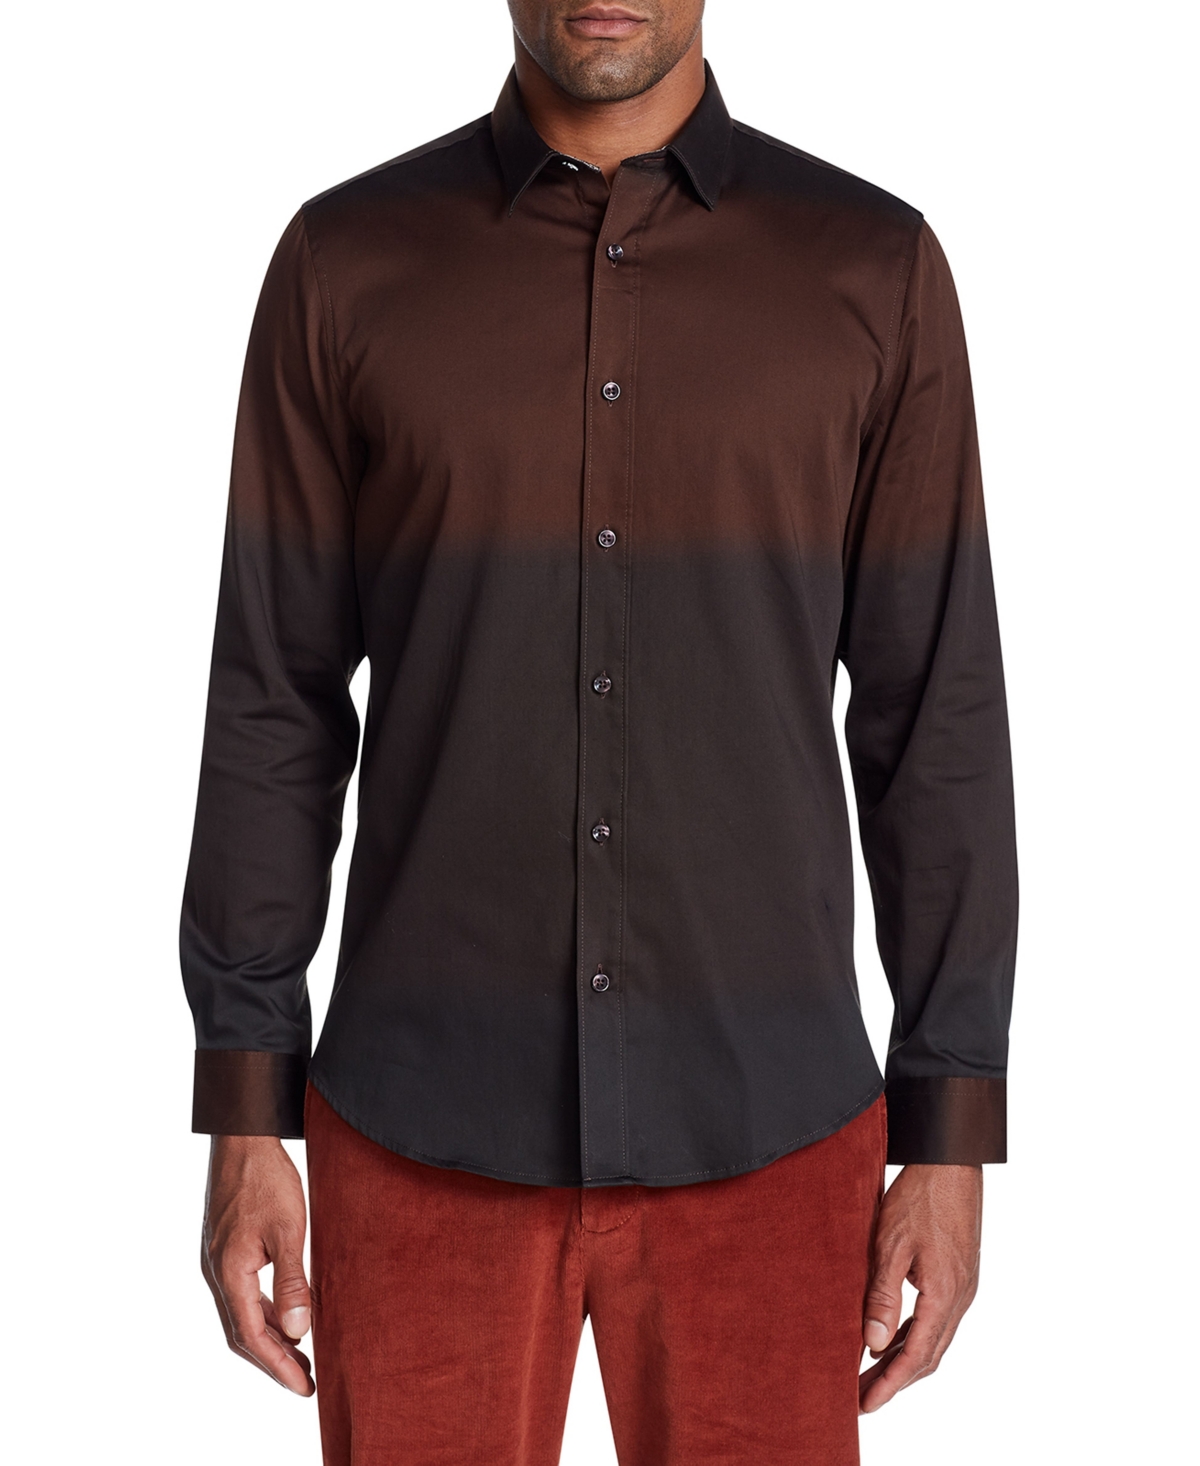 Men's Tosi Stretch Long Sleeve Button Up Shirt - Multi